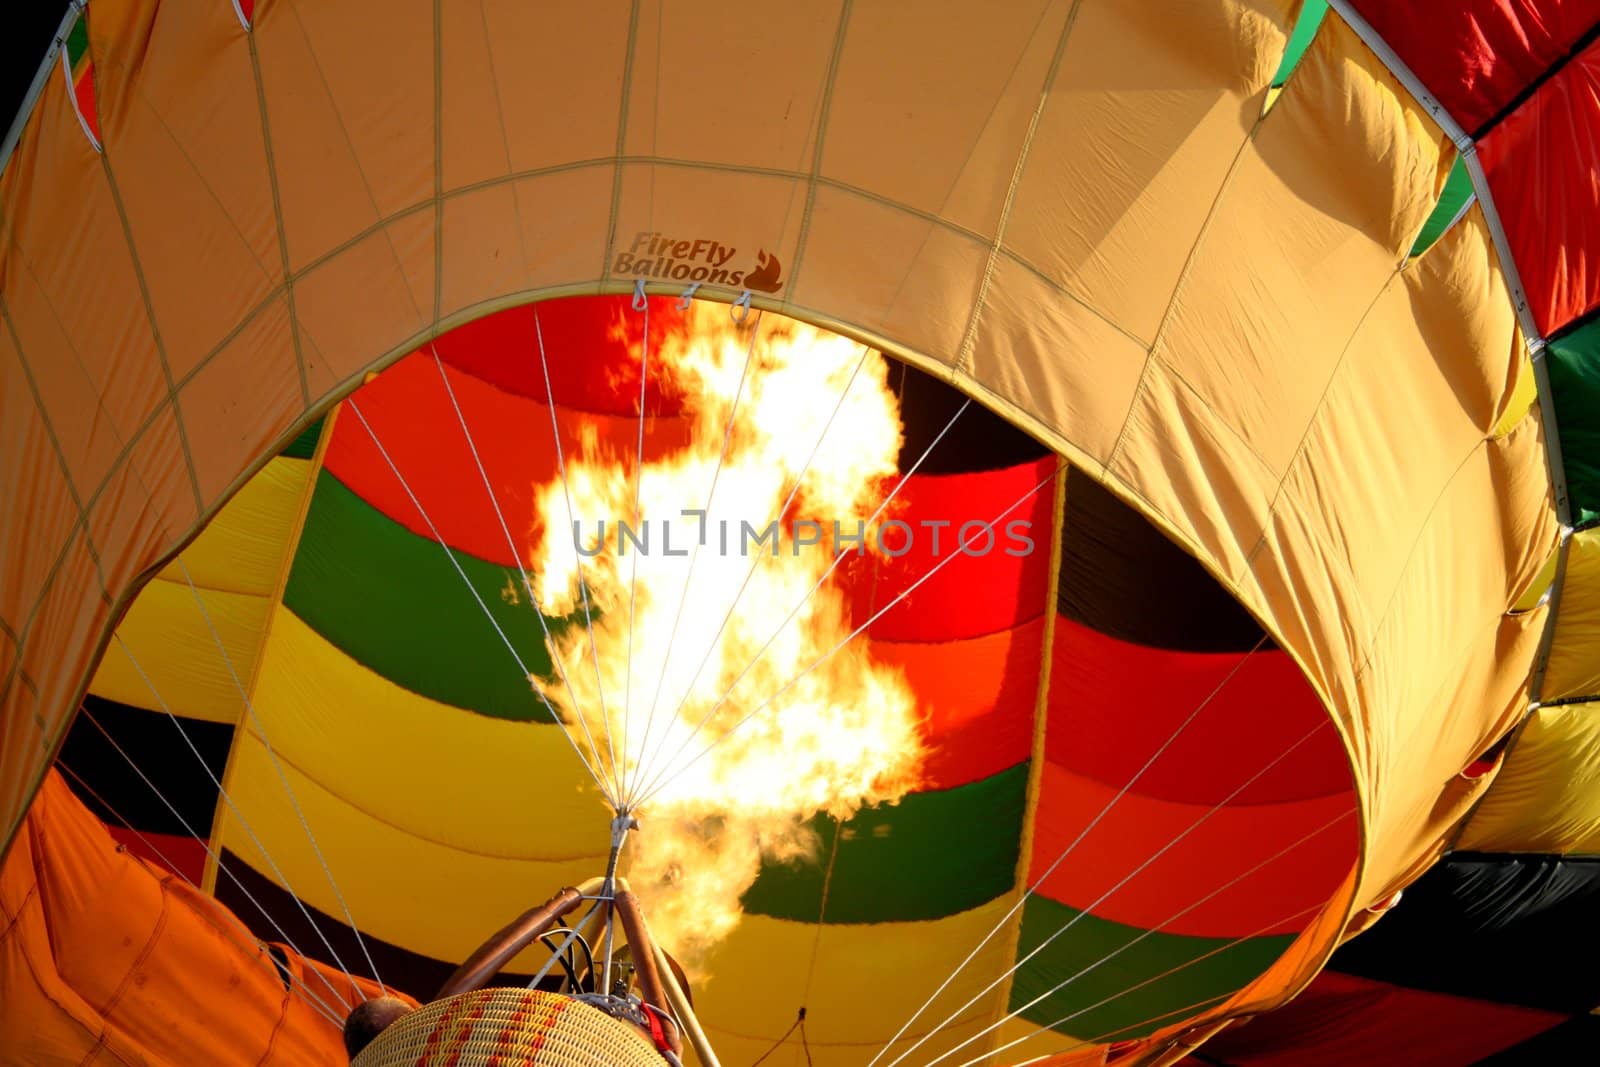 Hot flames from a burner used to heat up the air in a balloon